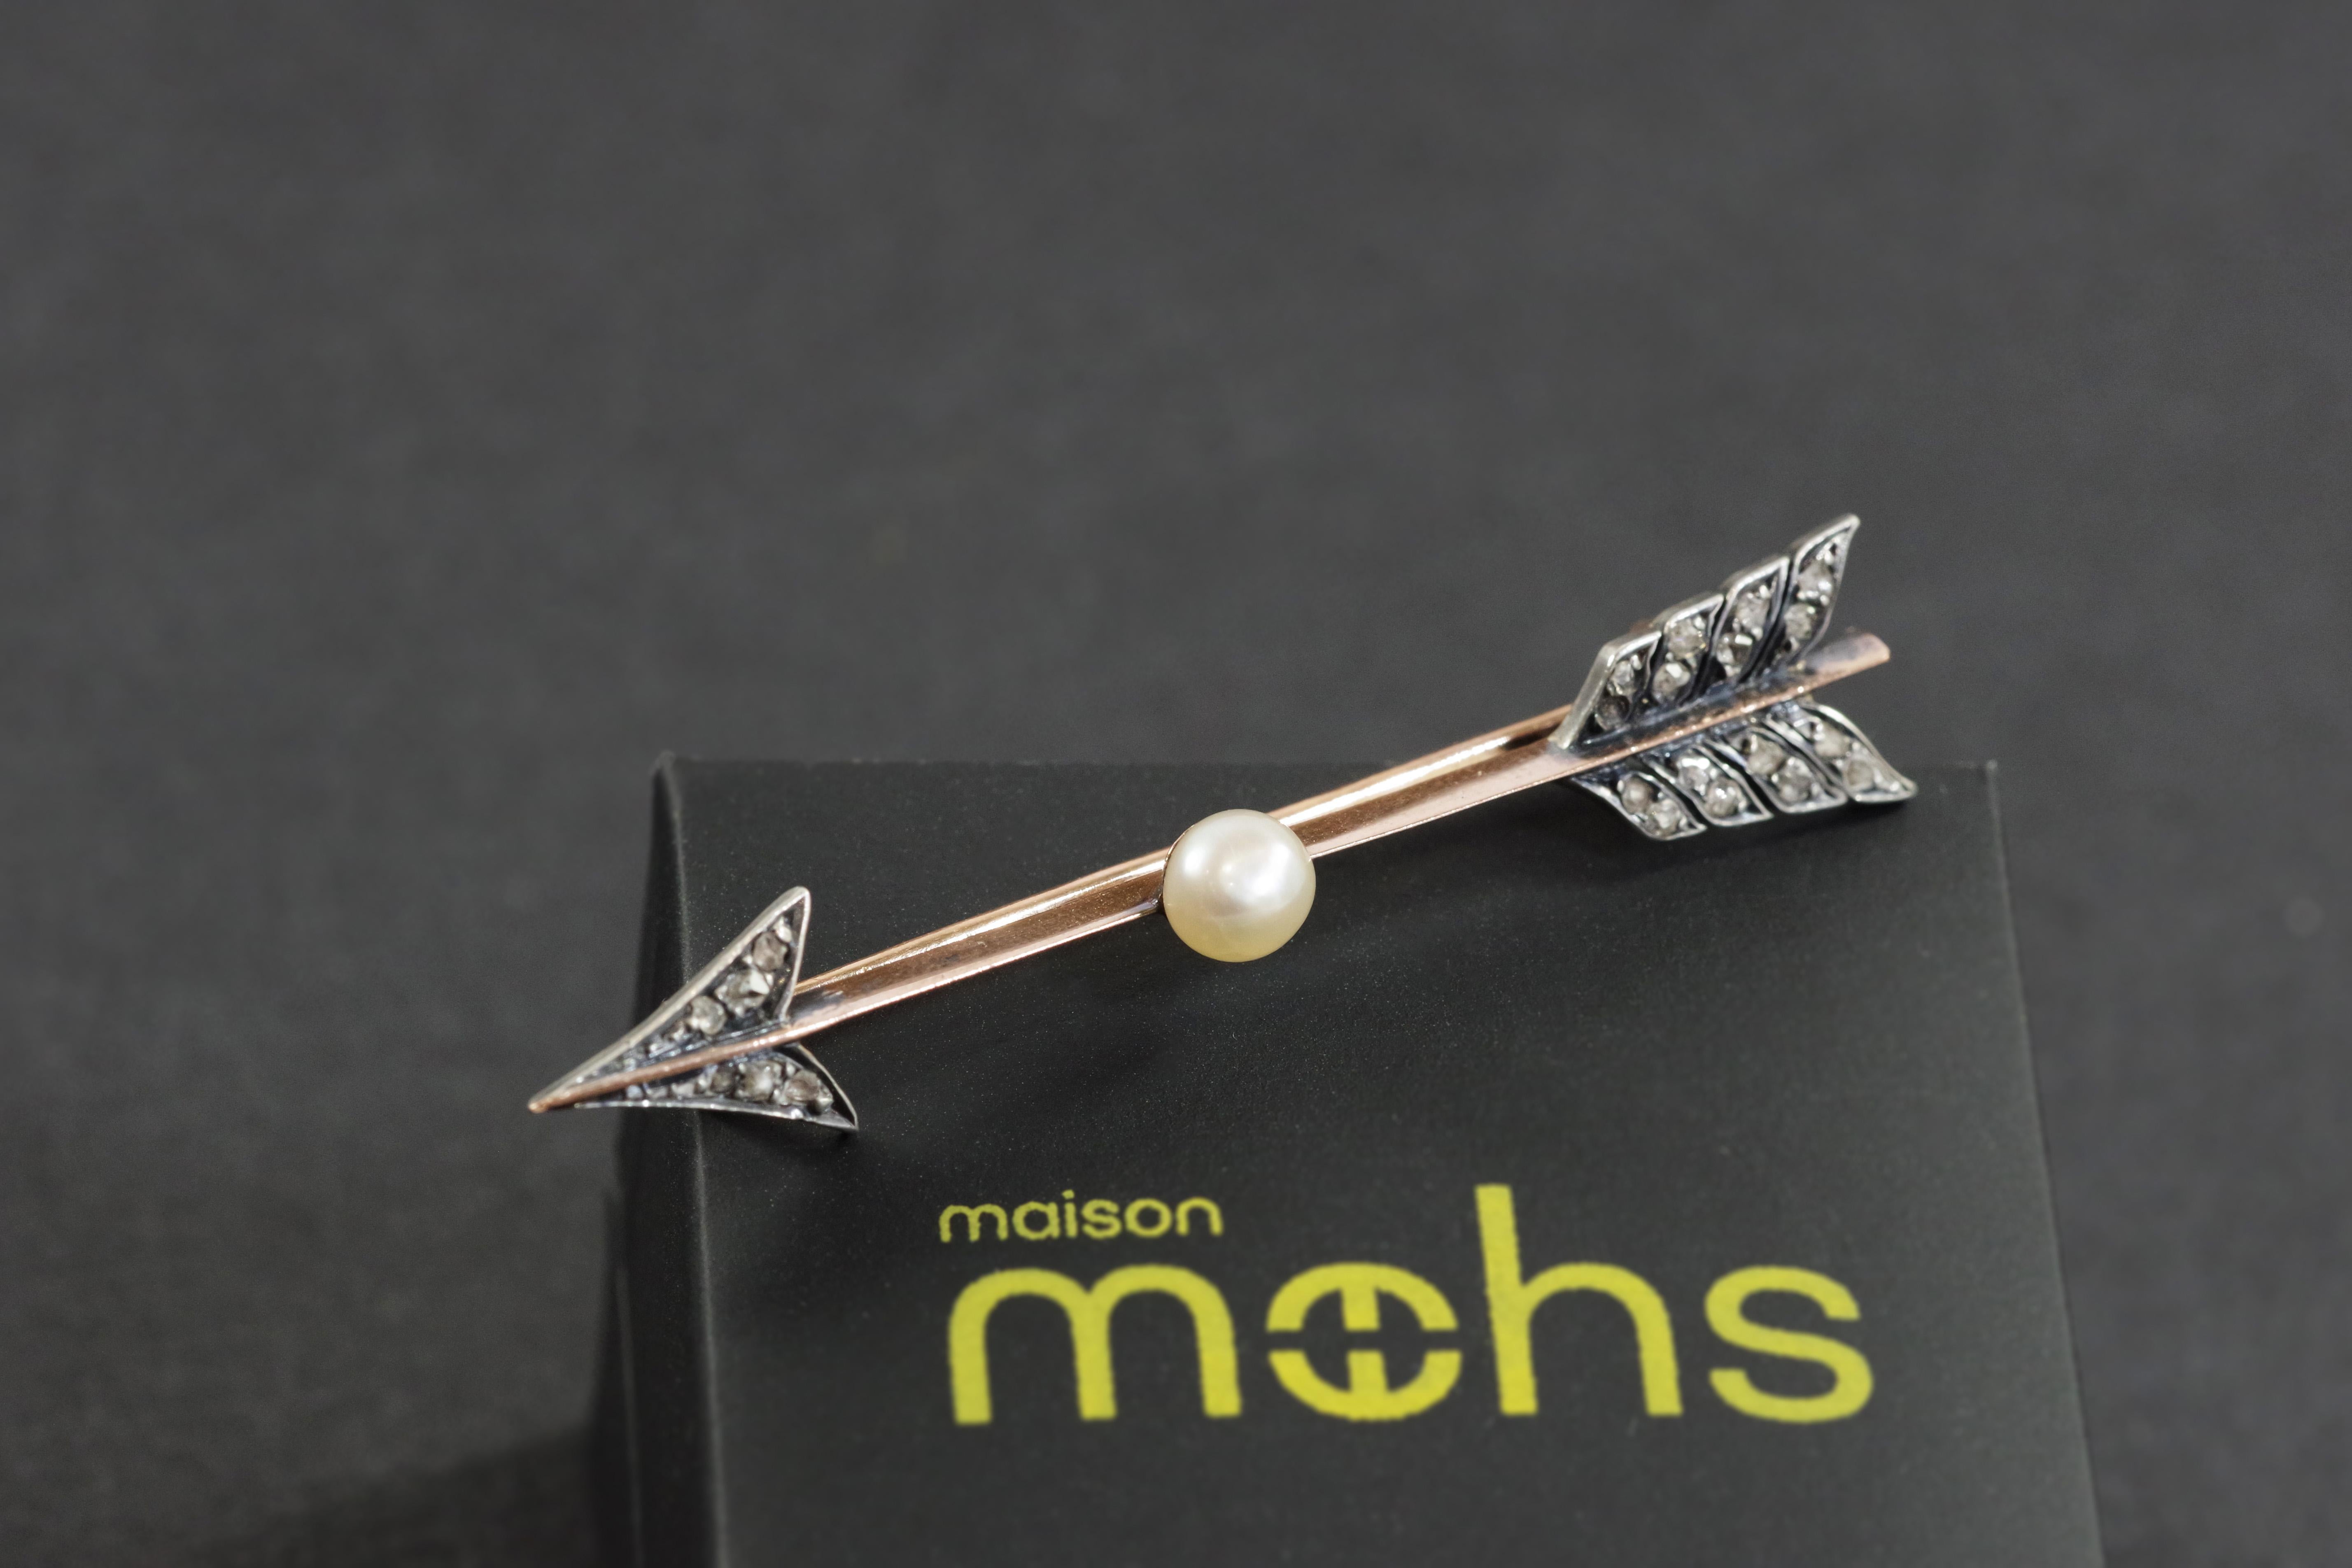 Edwardian diamond pearl arrow brooch in 18 karats rose gold and silver. Brooch featuring an arrow with 22 diamonds on the tip and tail, and a fine pearl on the shaft (diameter approx. 4.9 mm). Antique brooch, late 19th - early 20th